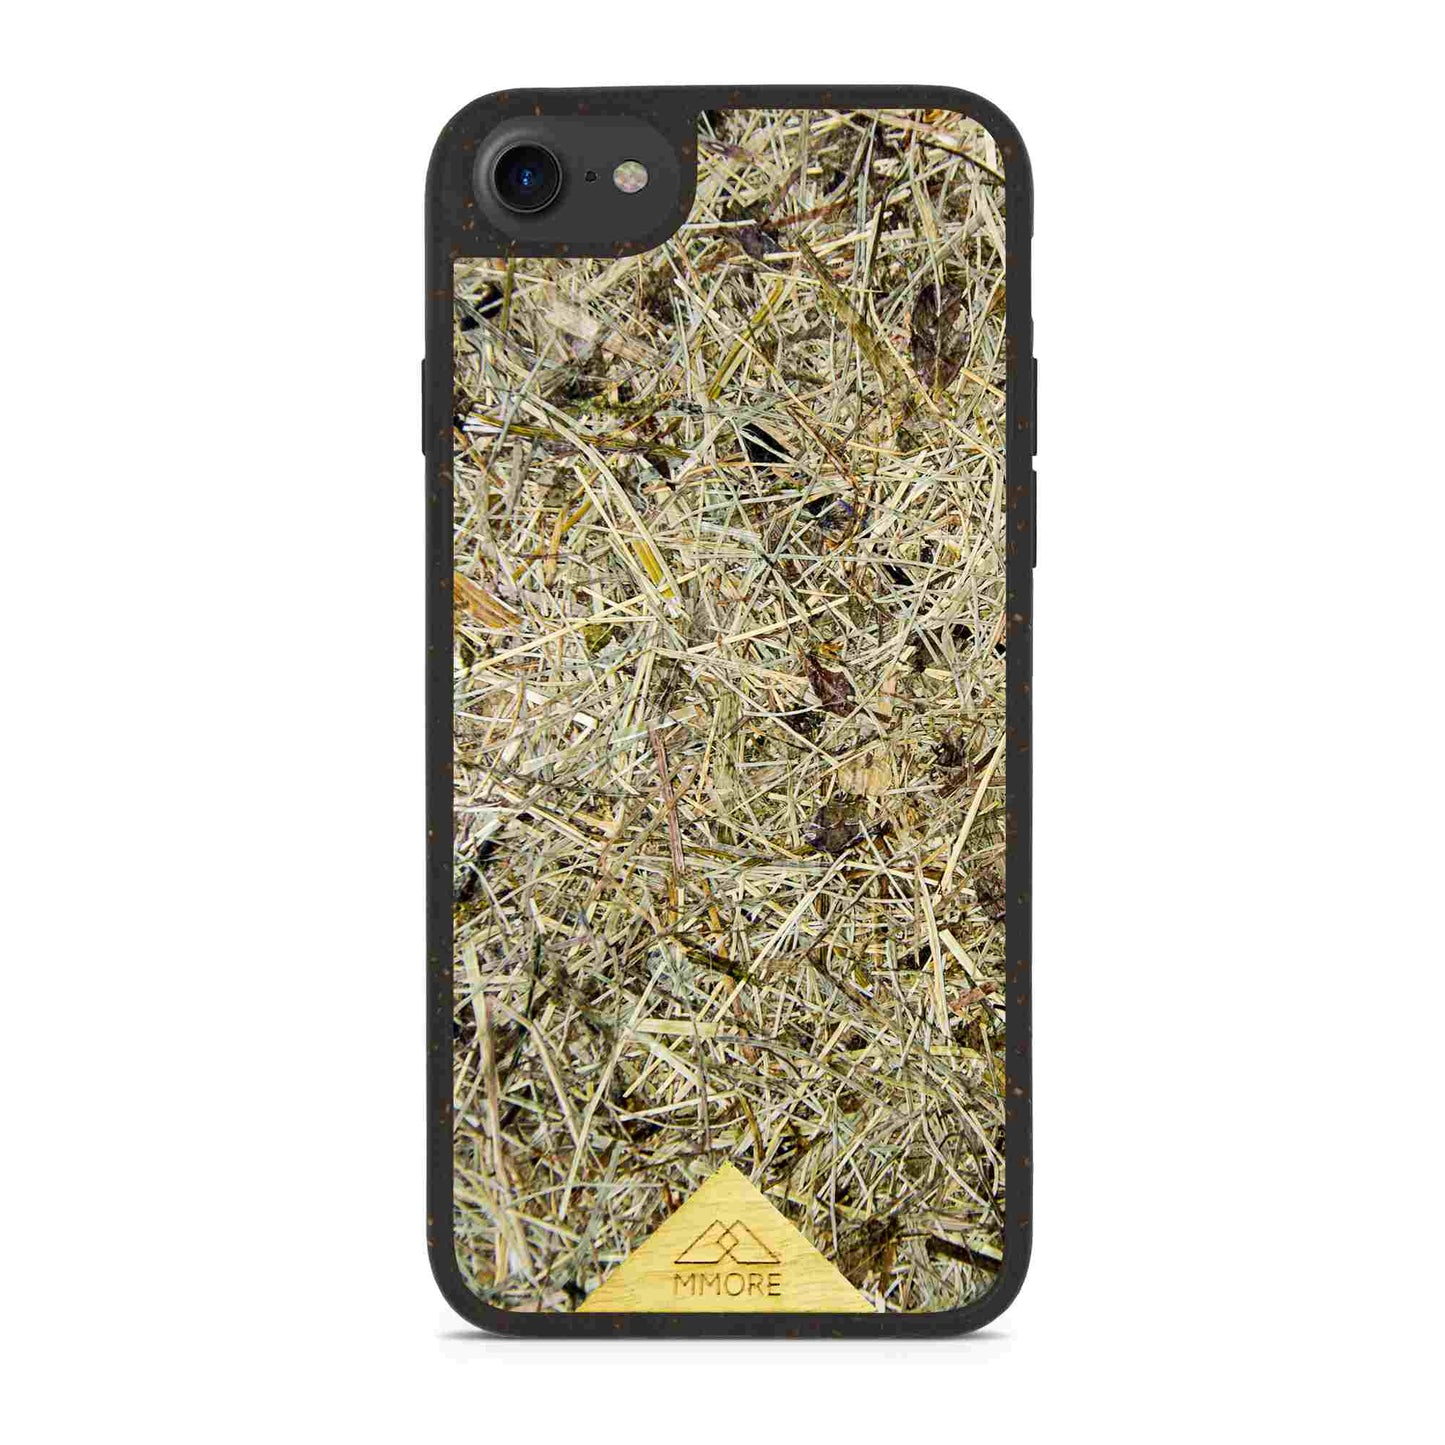 Biodegradable Organic Pressed Material Backing Phone Cases